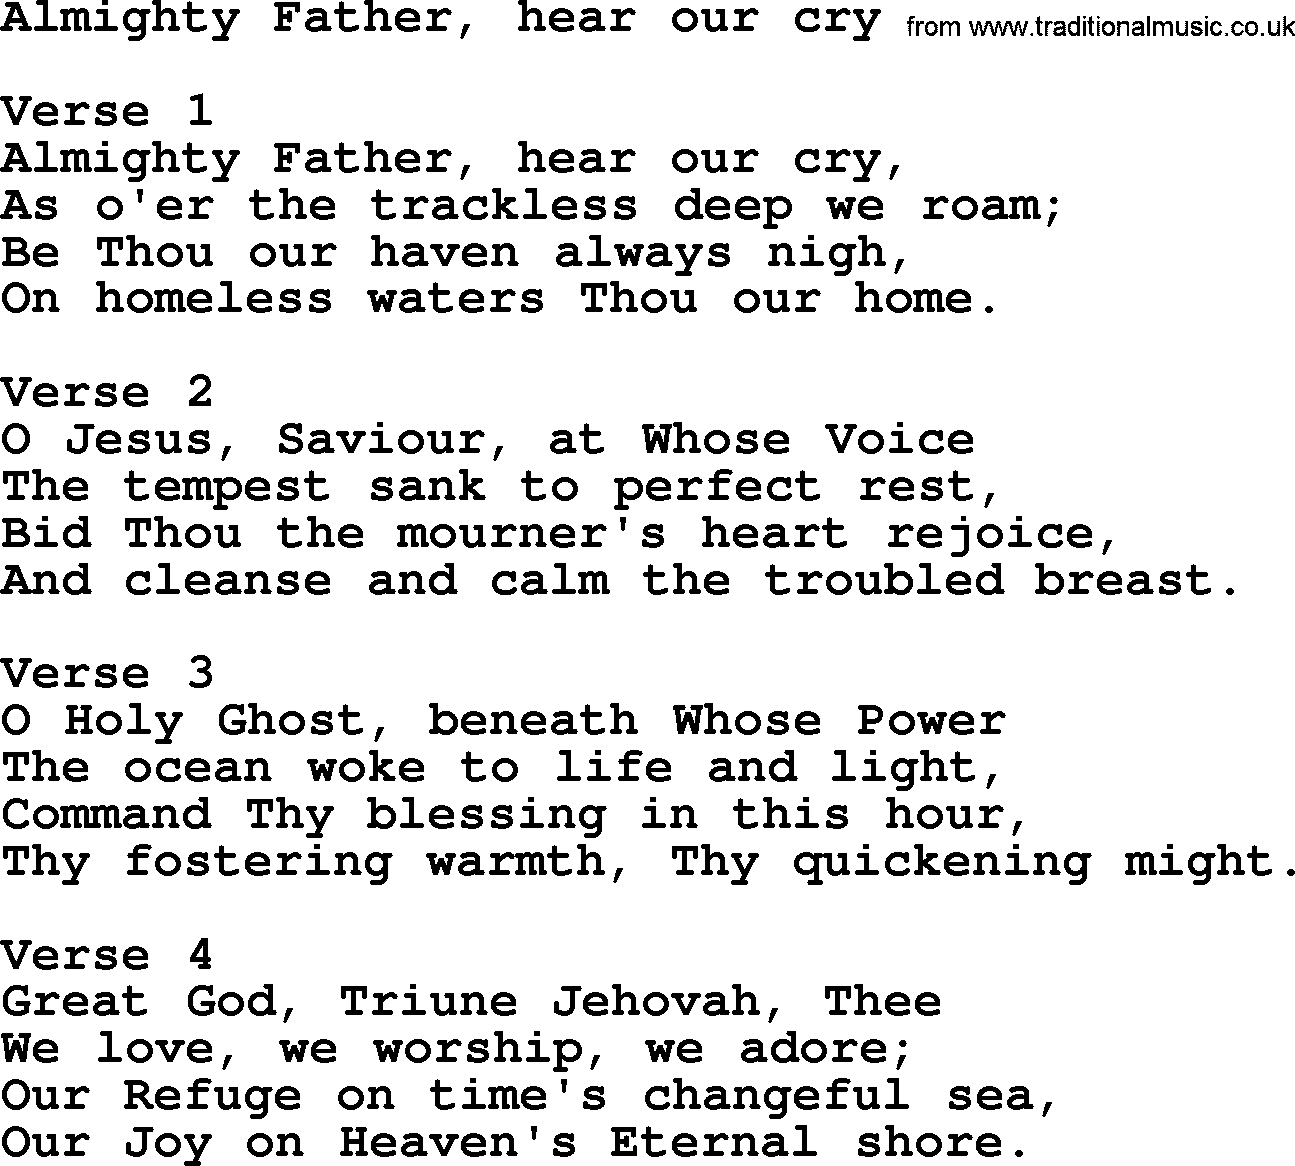 Apostolic and Pentecostal Hymns and Gospel Songs, Hymn: Almighty Father, Hear Our Cry, Christian lyrics and PDF